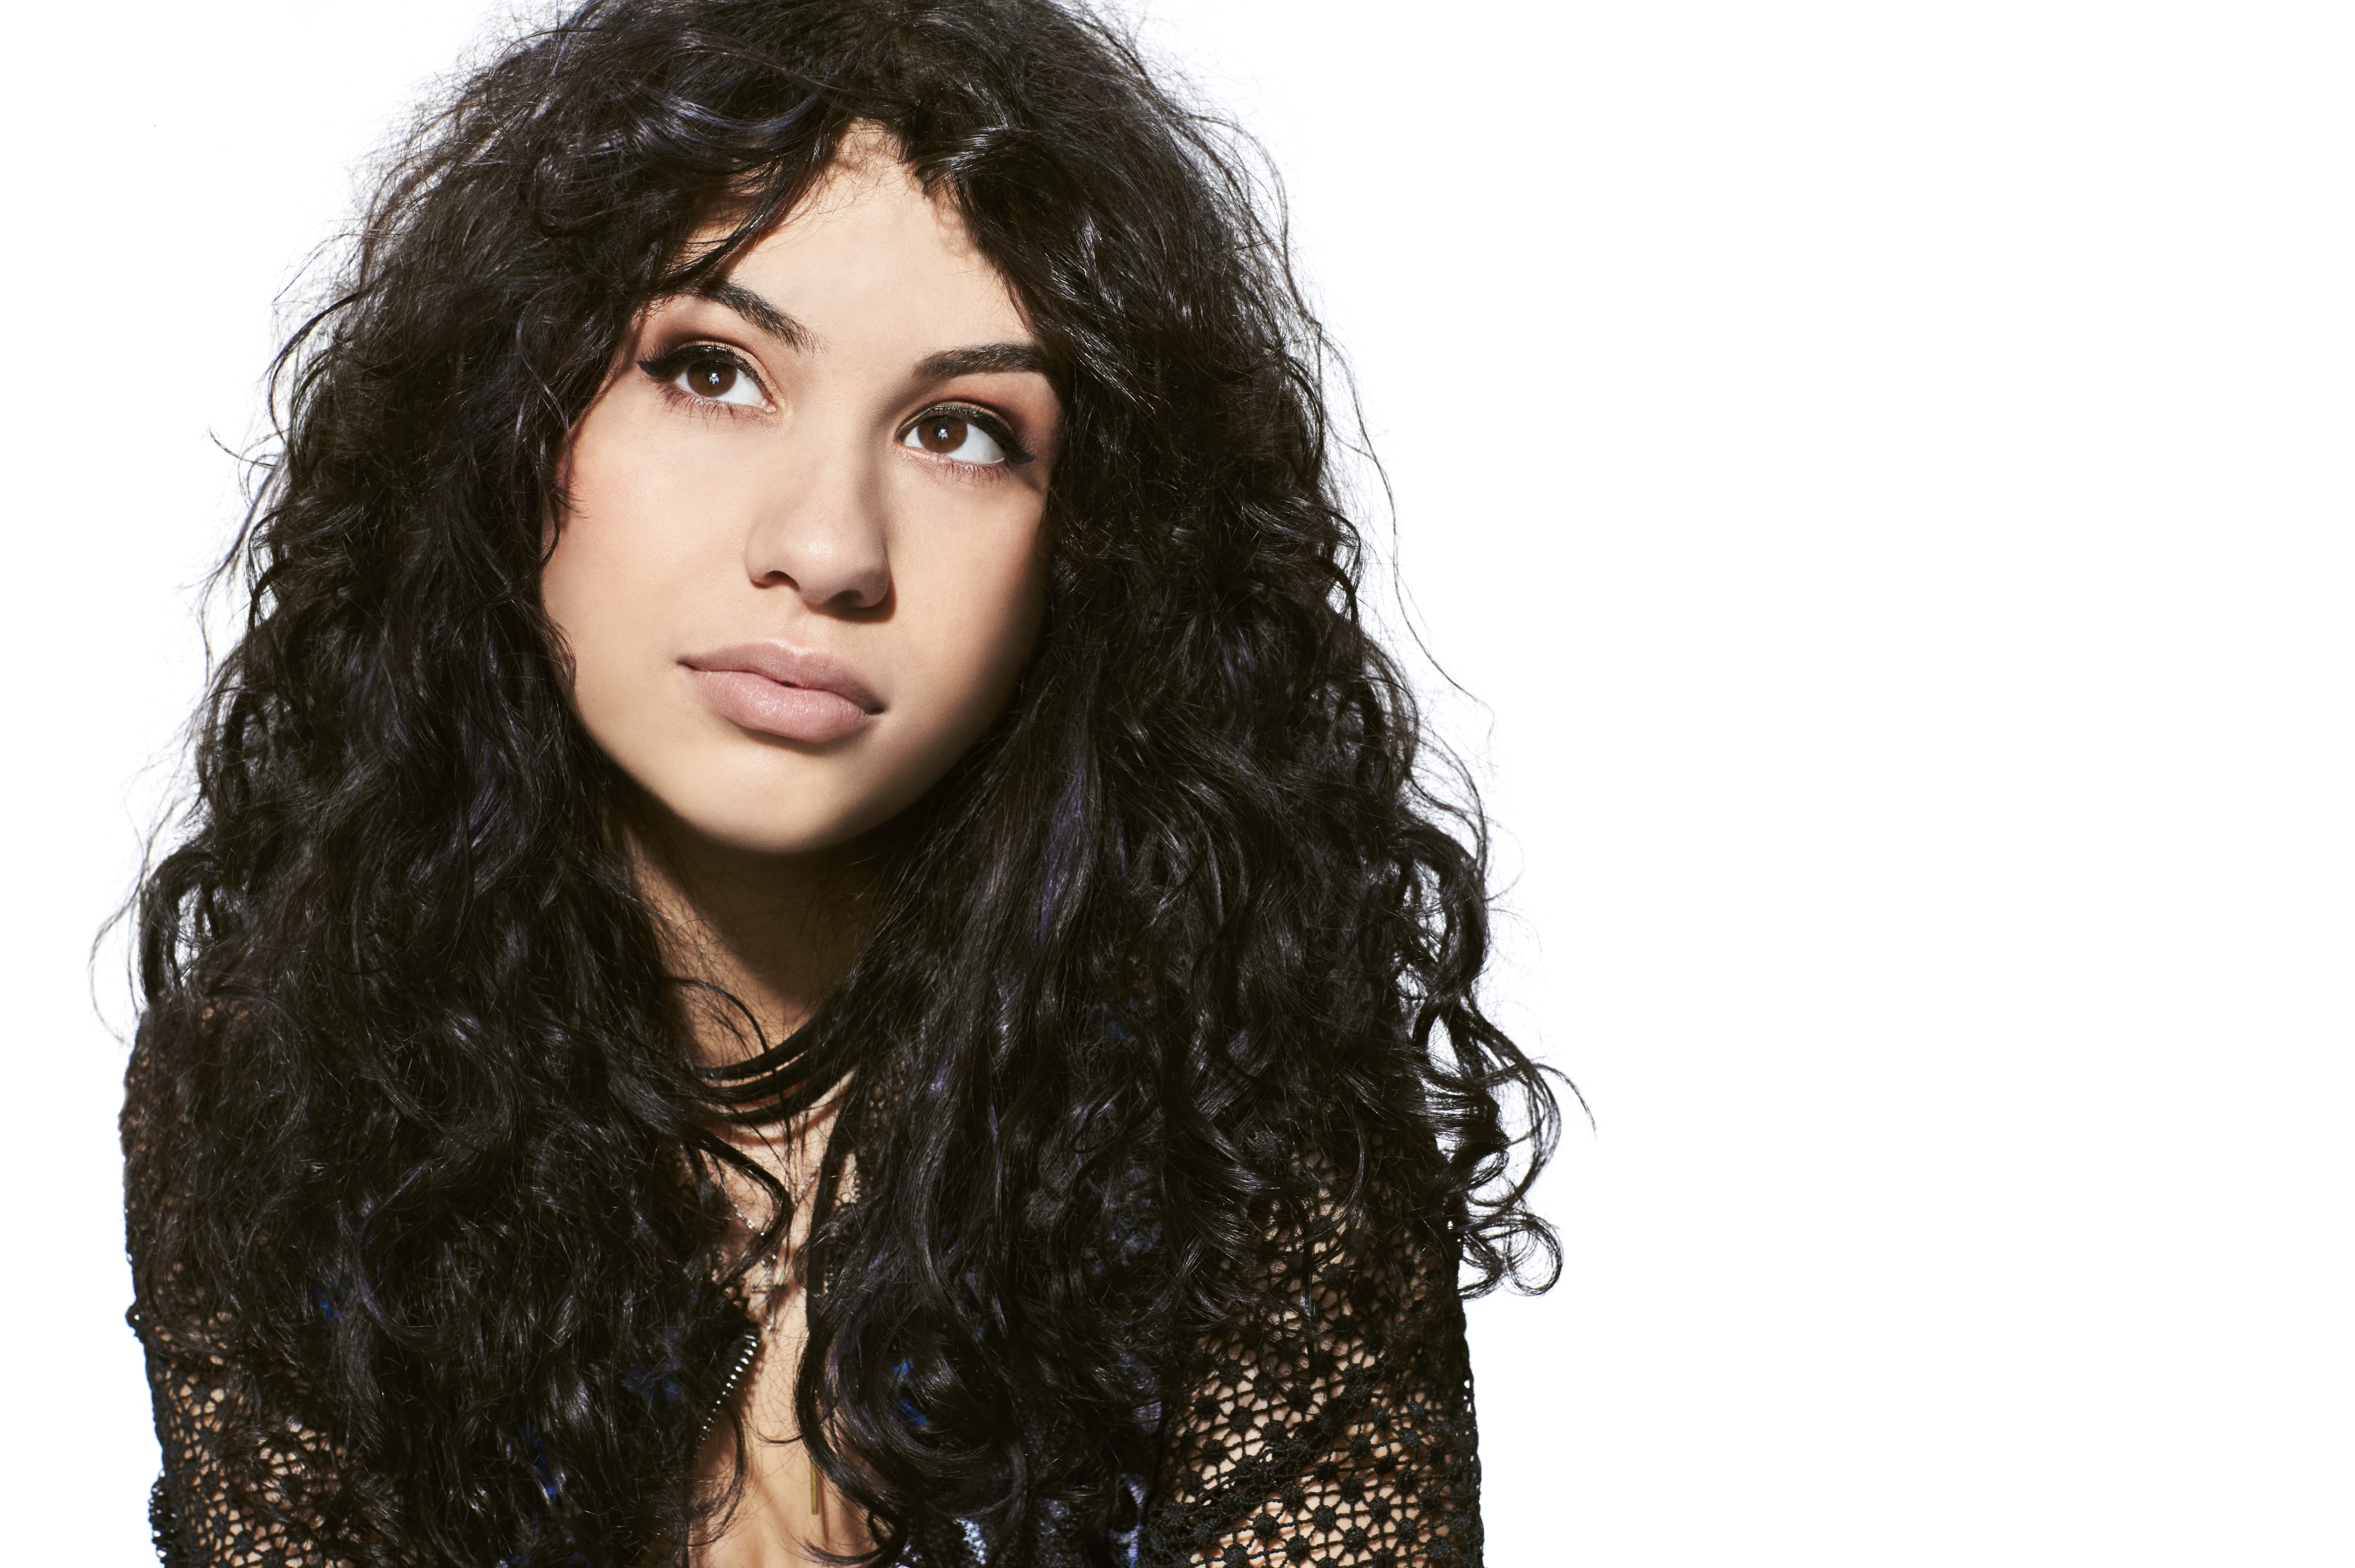 HD wallpaper, Canadian Singer, Alessia Cara, White Background